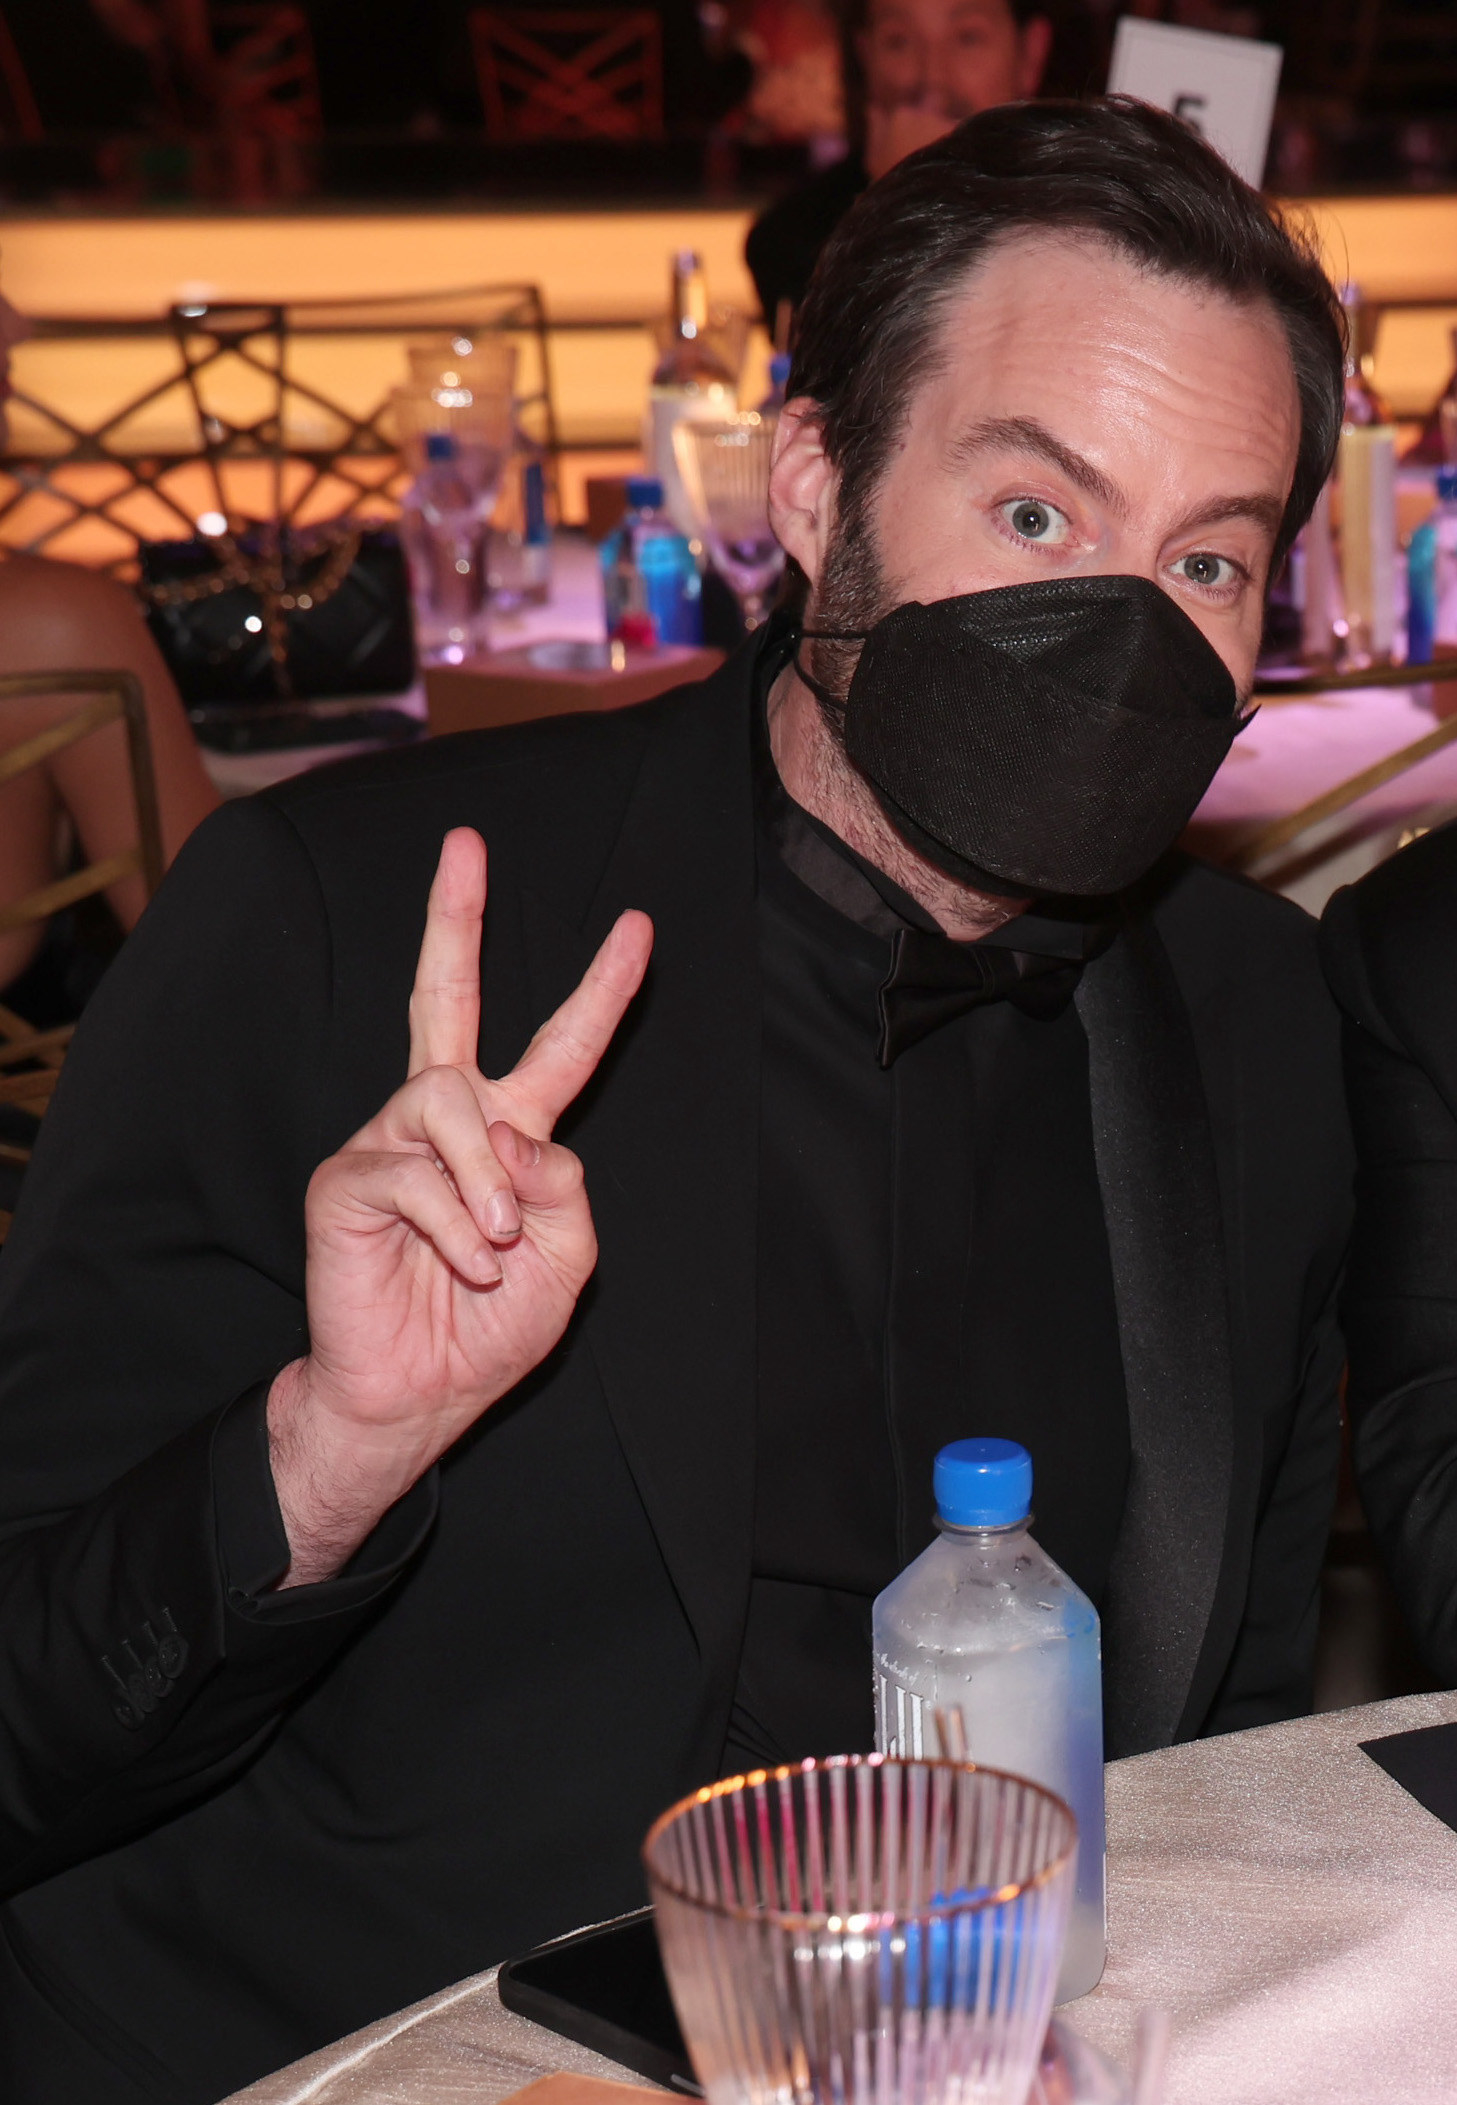 Bill Hader giving the peace sign and wearing a mask